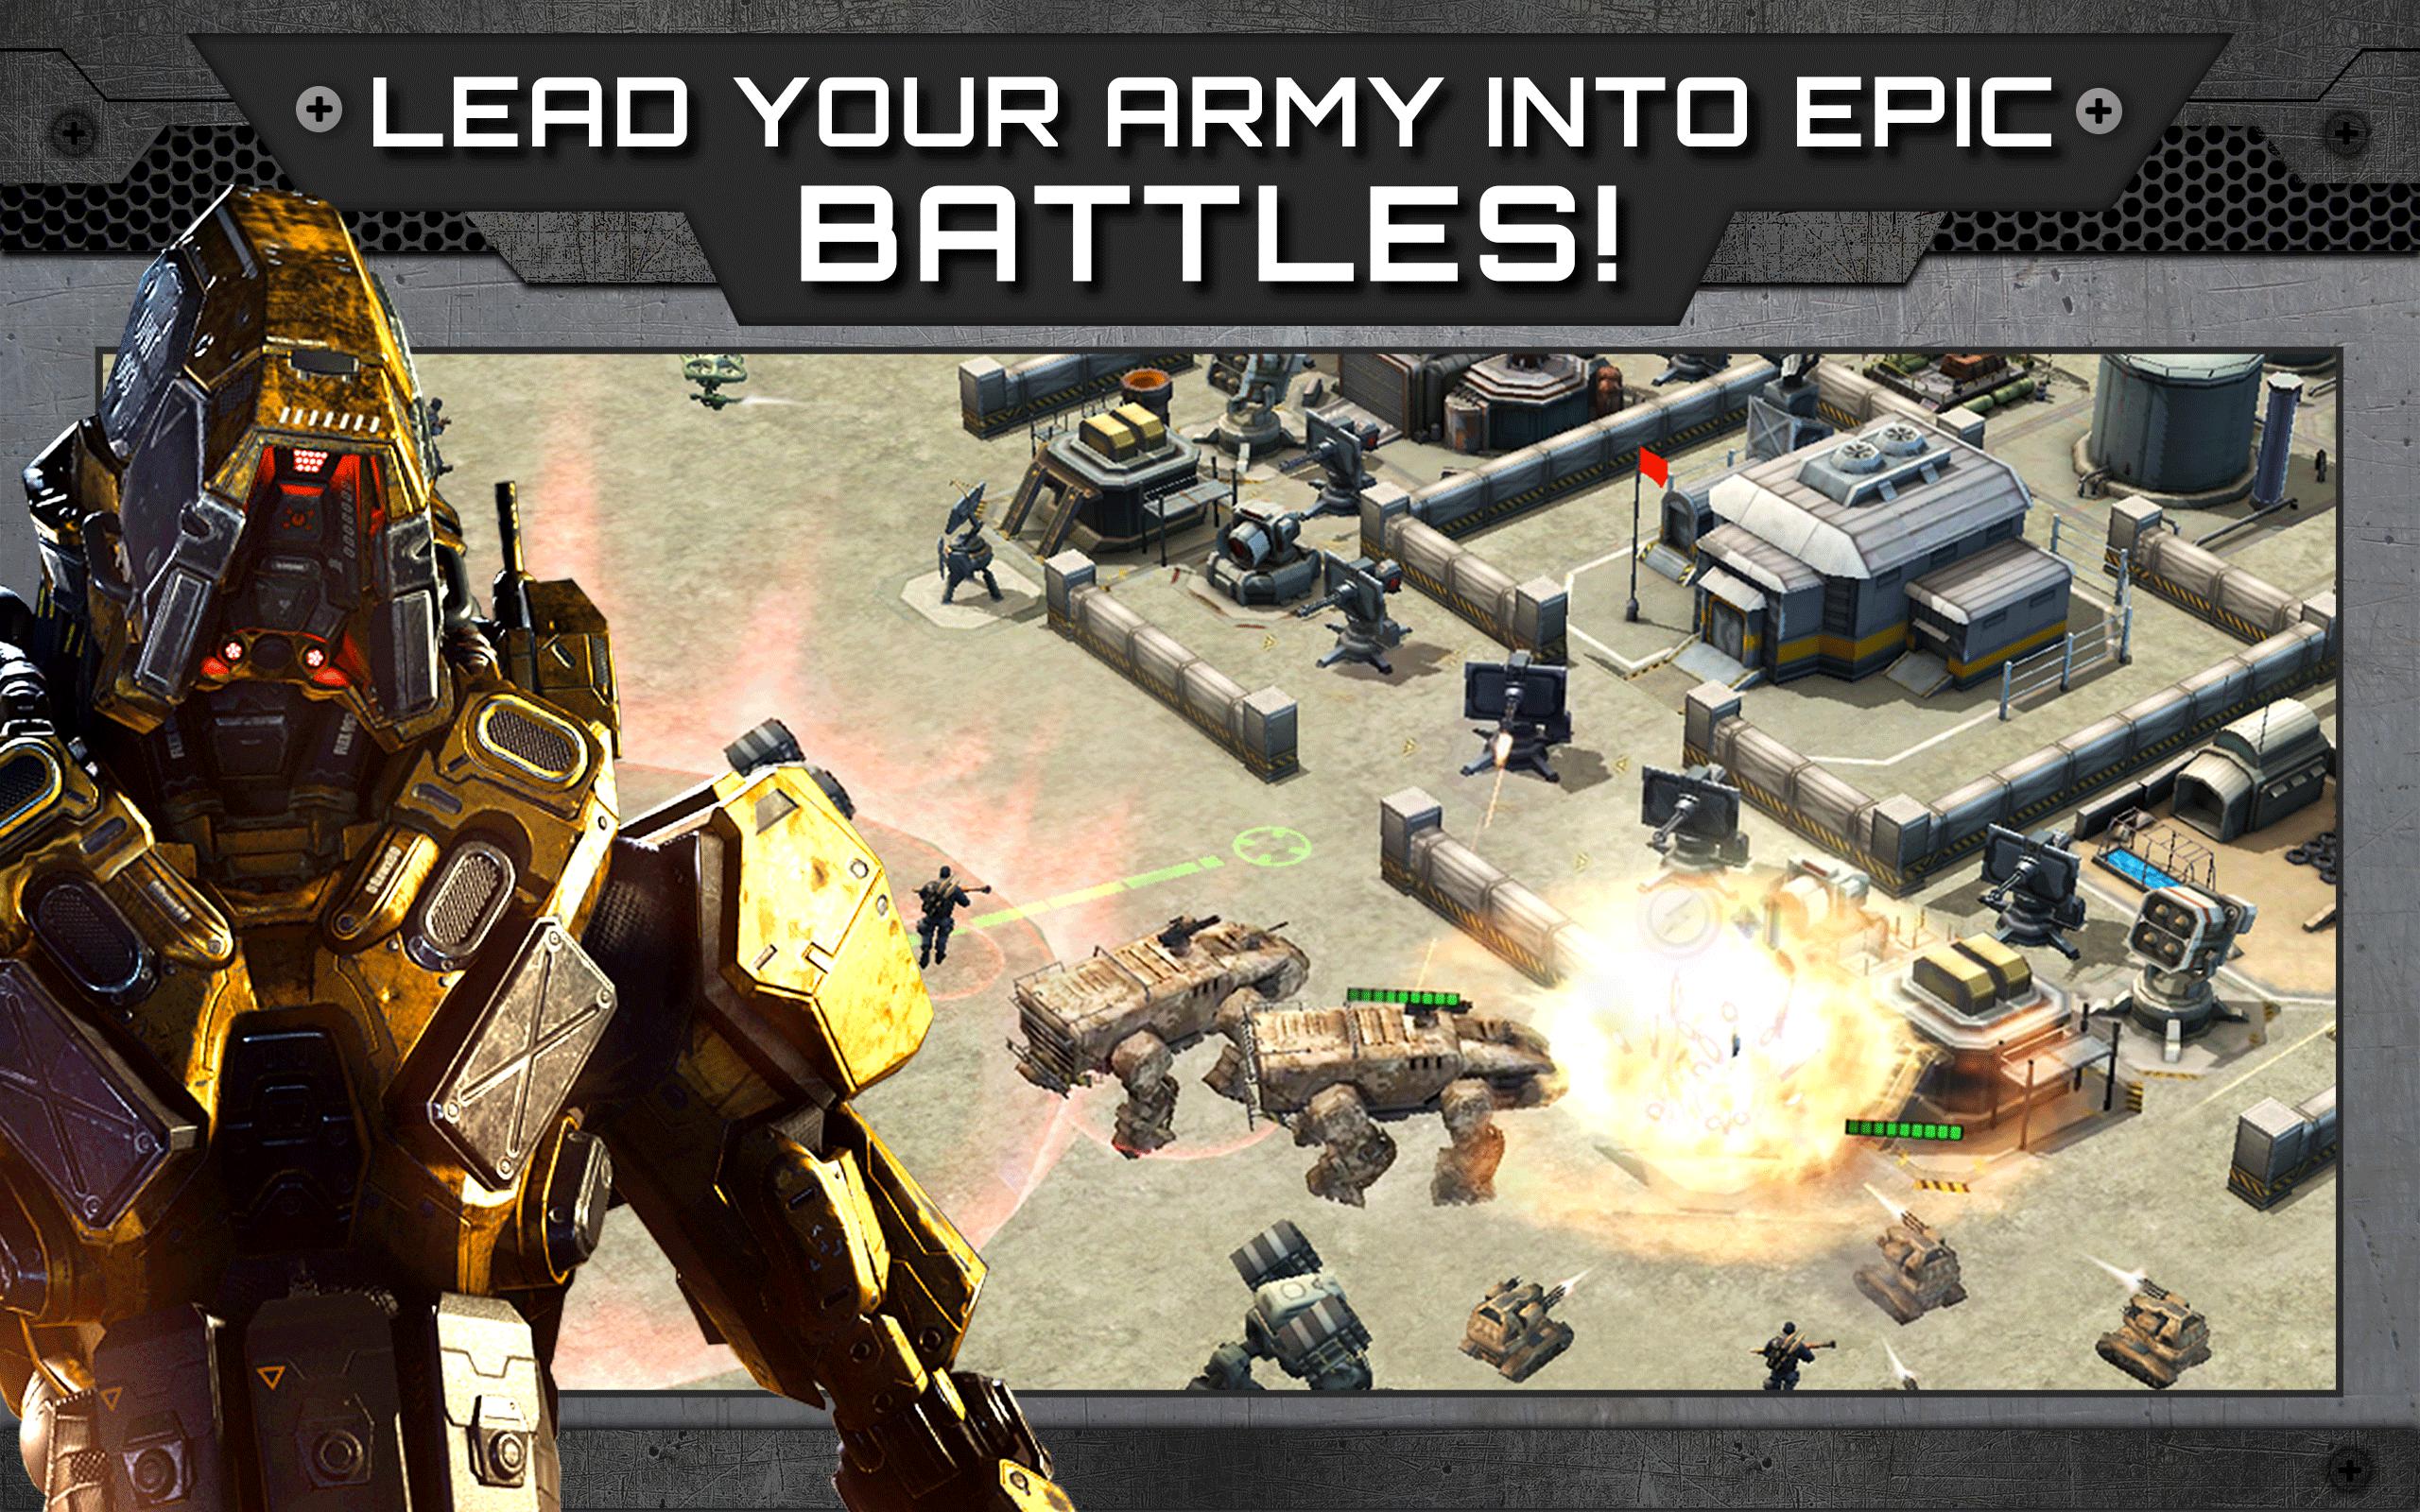 Call of DutyÂ®: Heroes for Android - APK Download - 